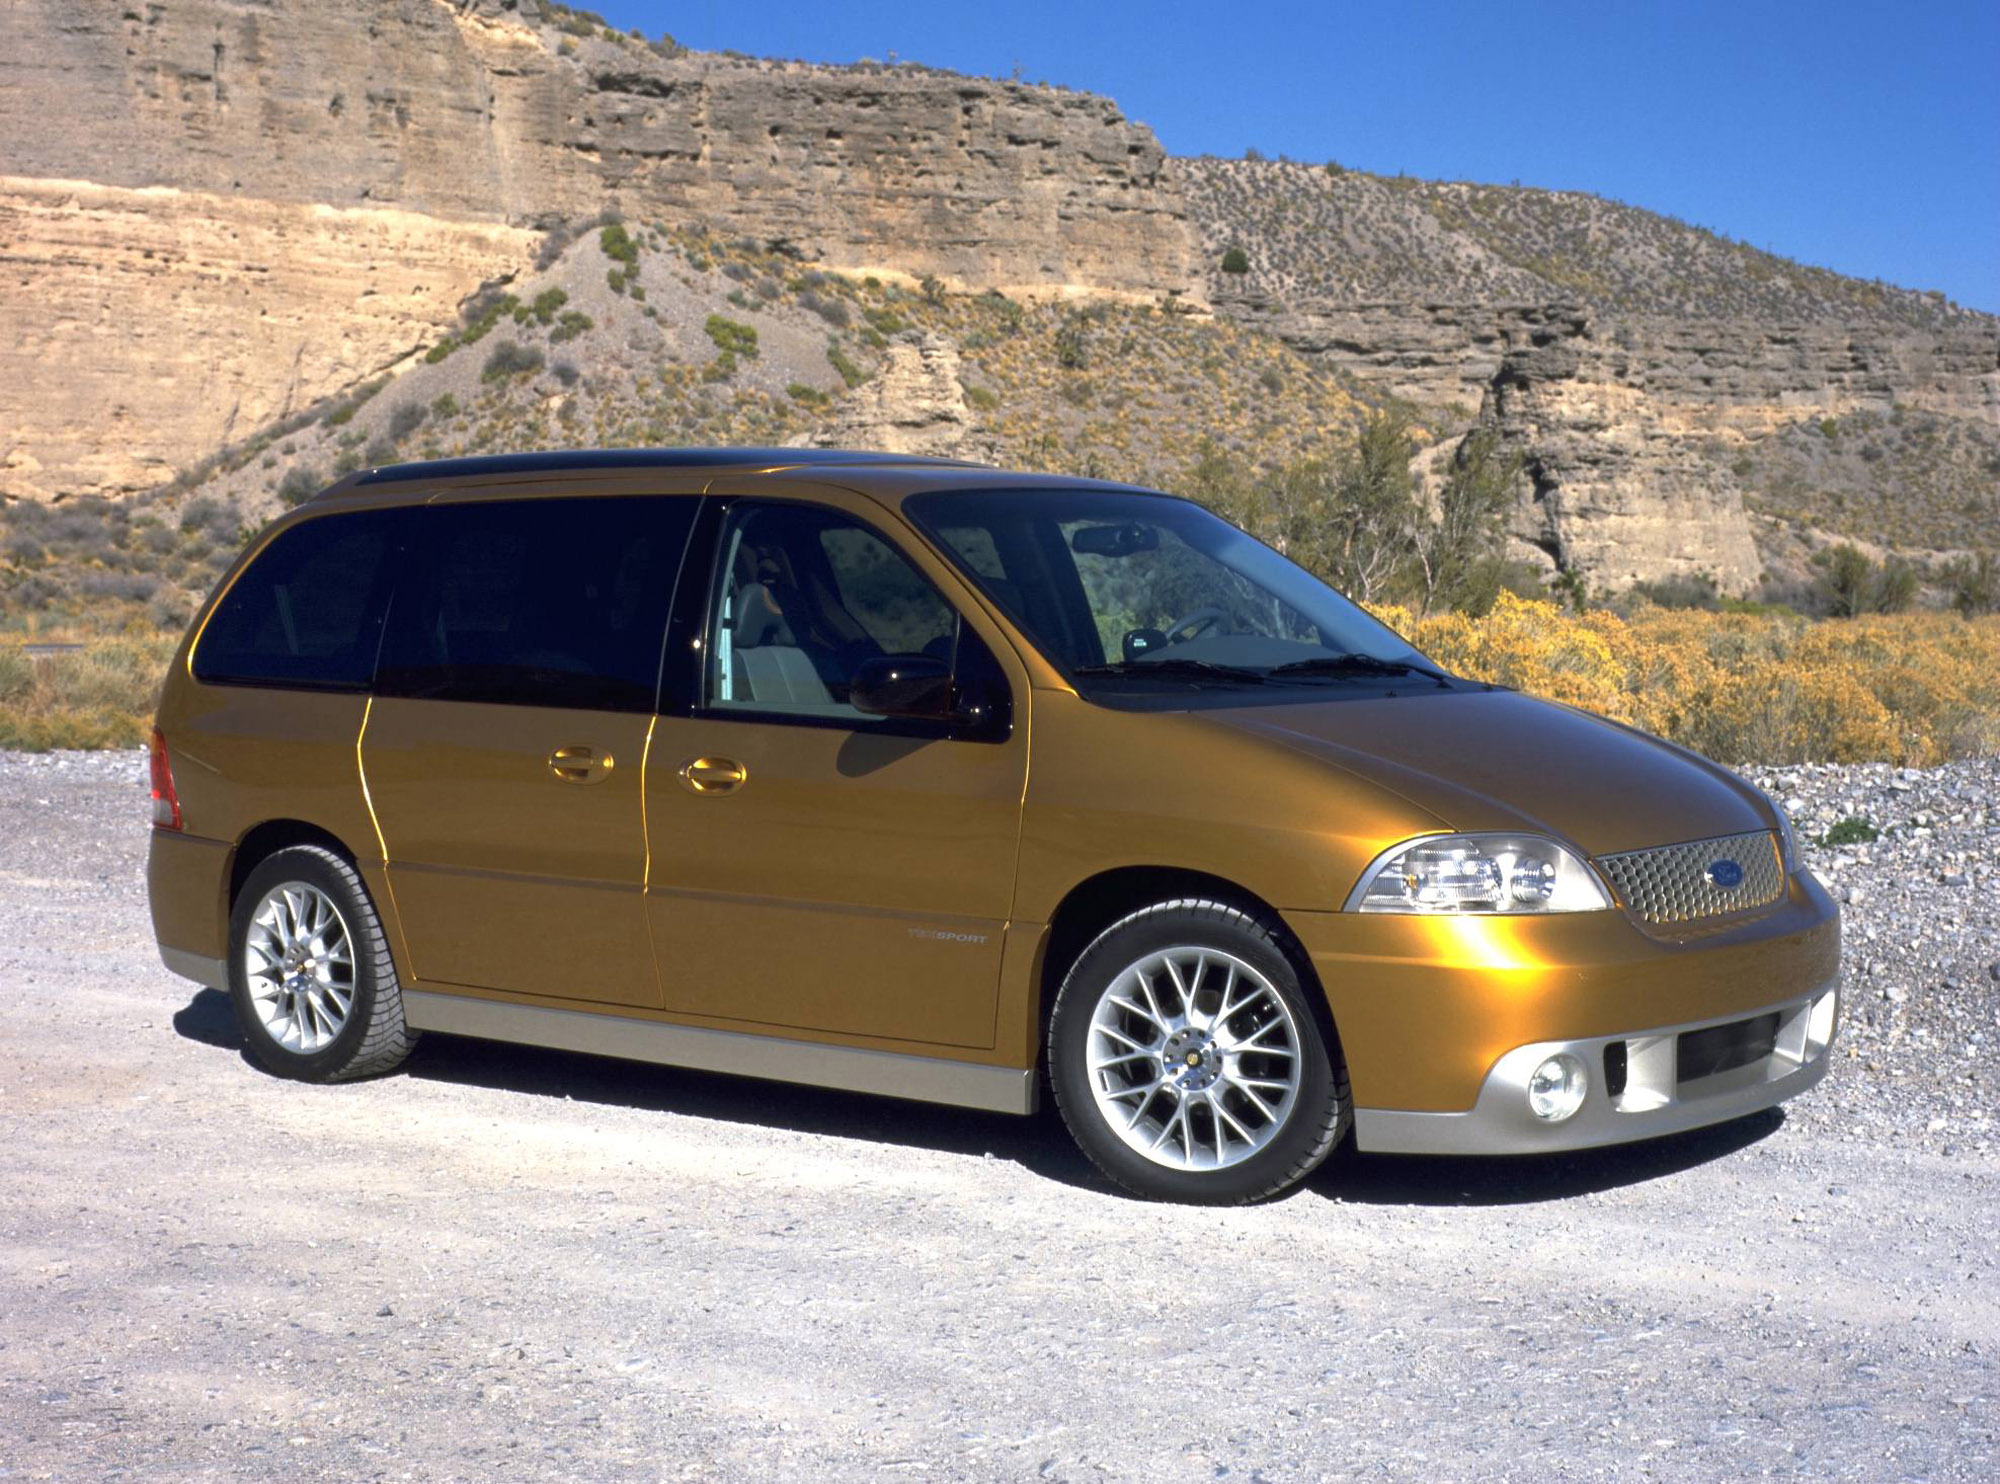 Ford Windstar 2013: Review, Amazing Pictures and Images – Look at the car